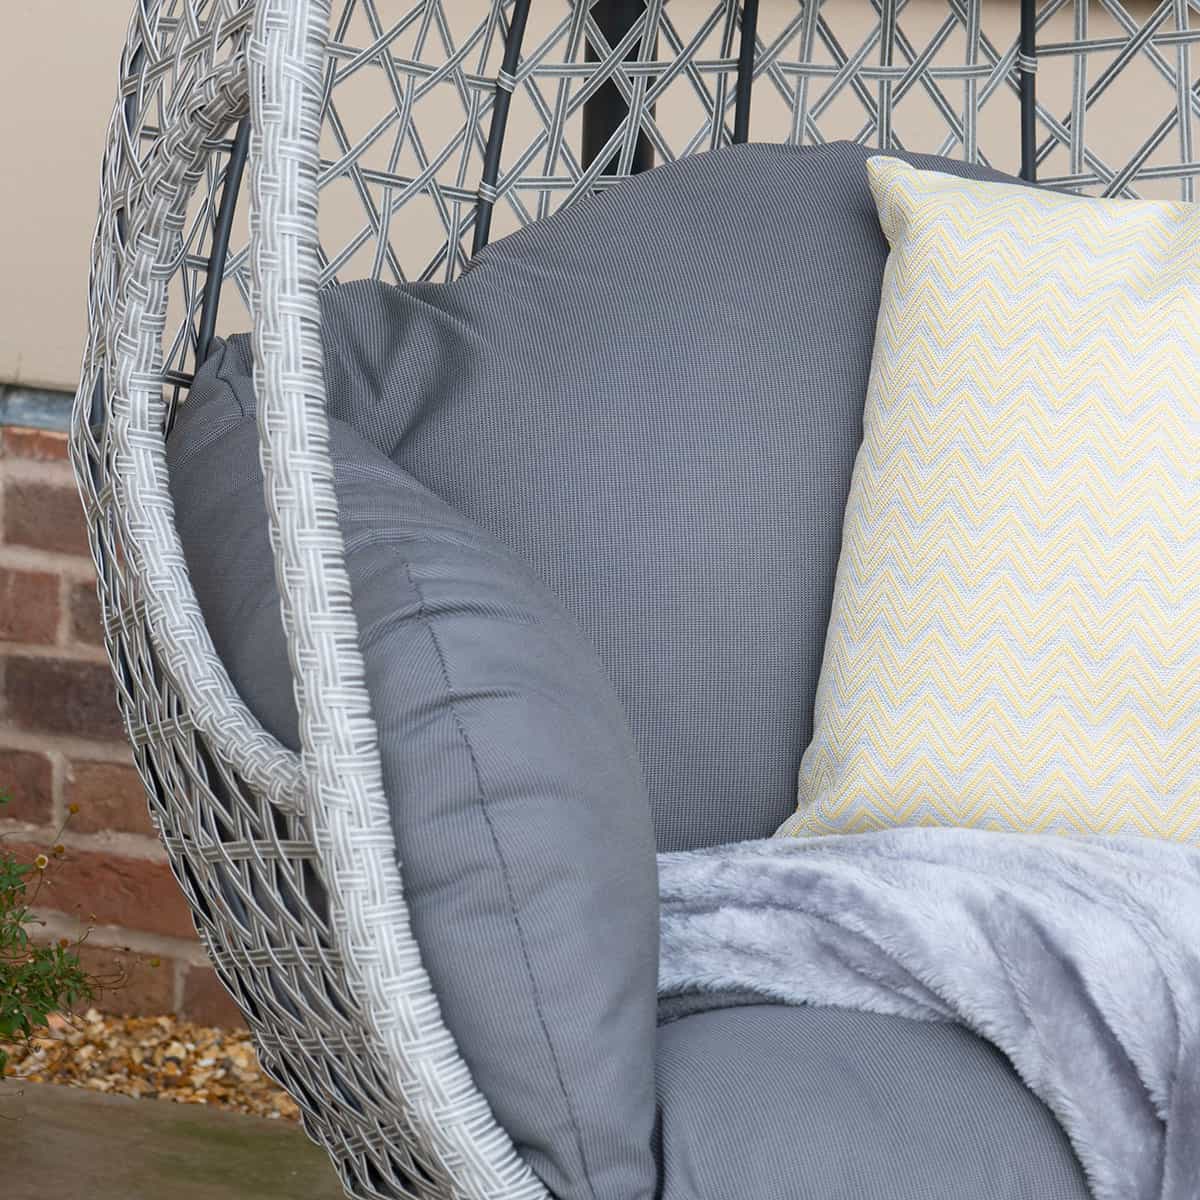 Grey Rattan Double Hanging Egg Chair